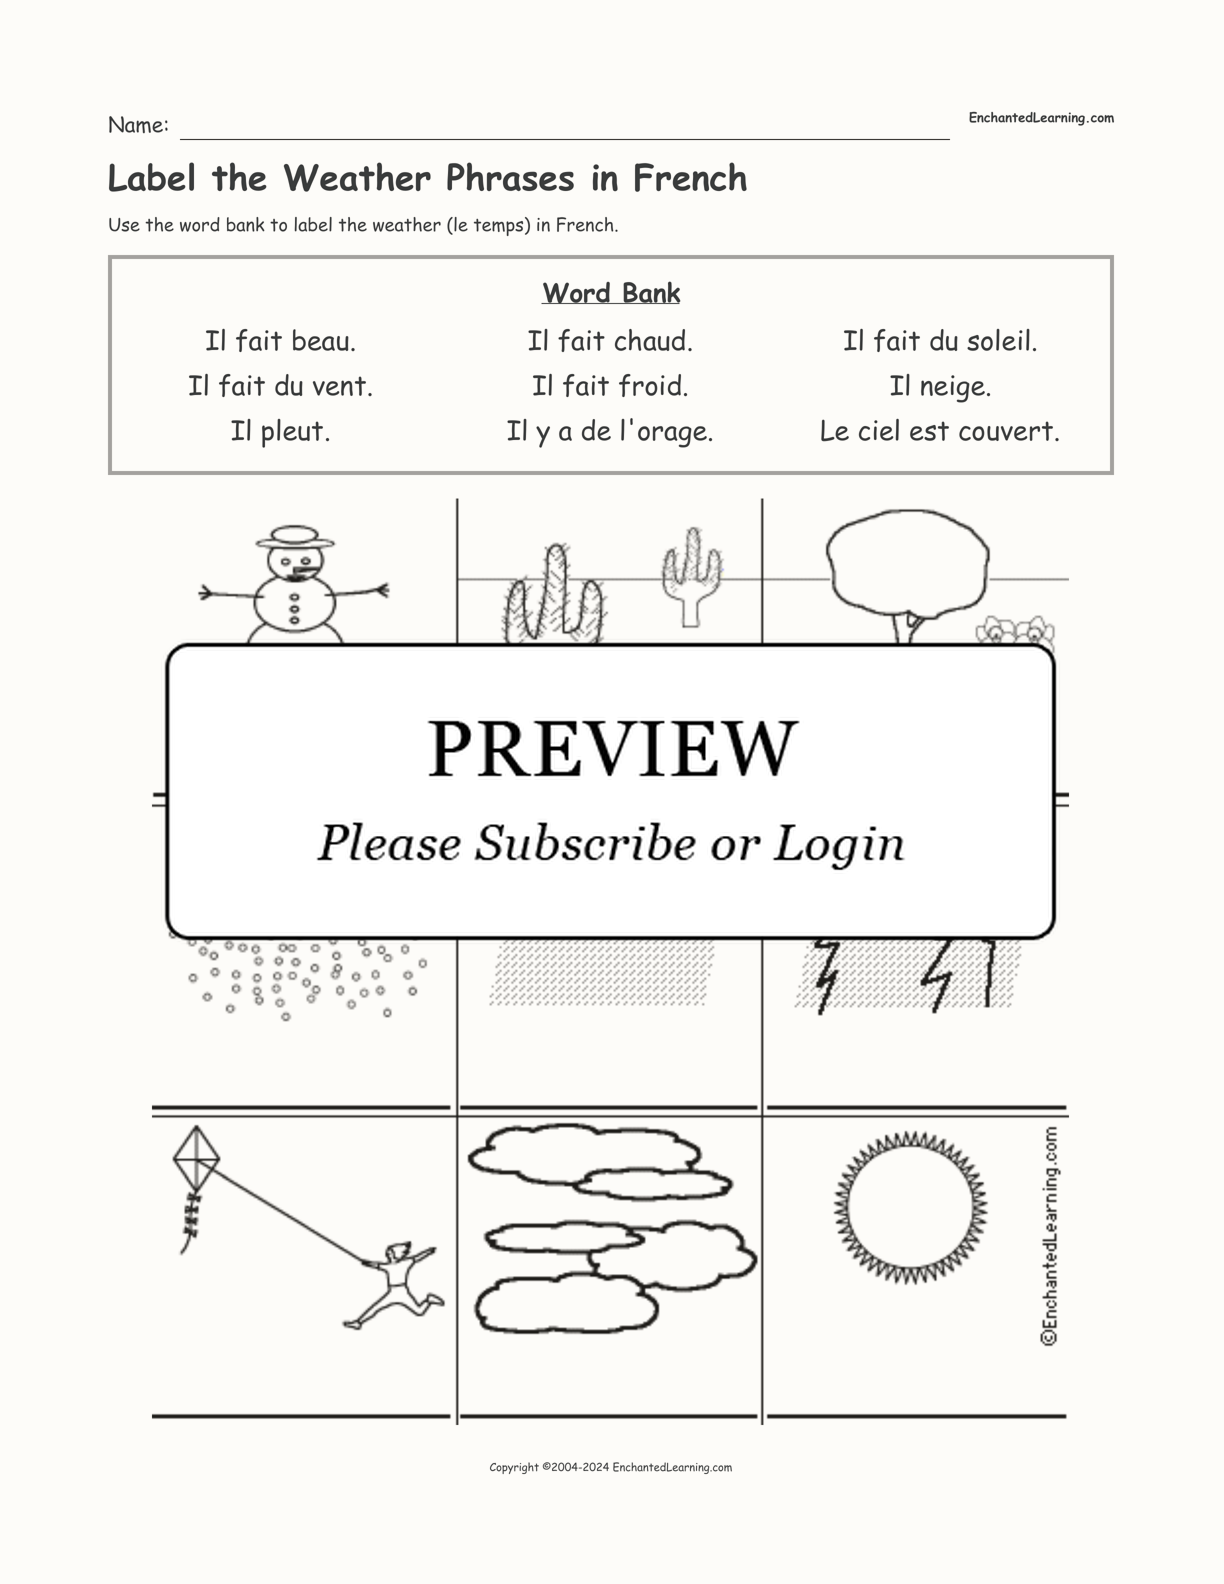 Label the Weather Phrases in French interactive worksheet page 1